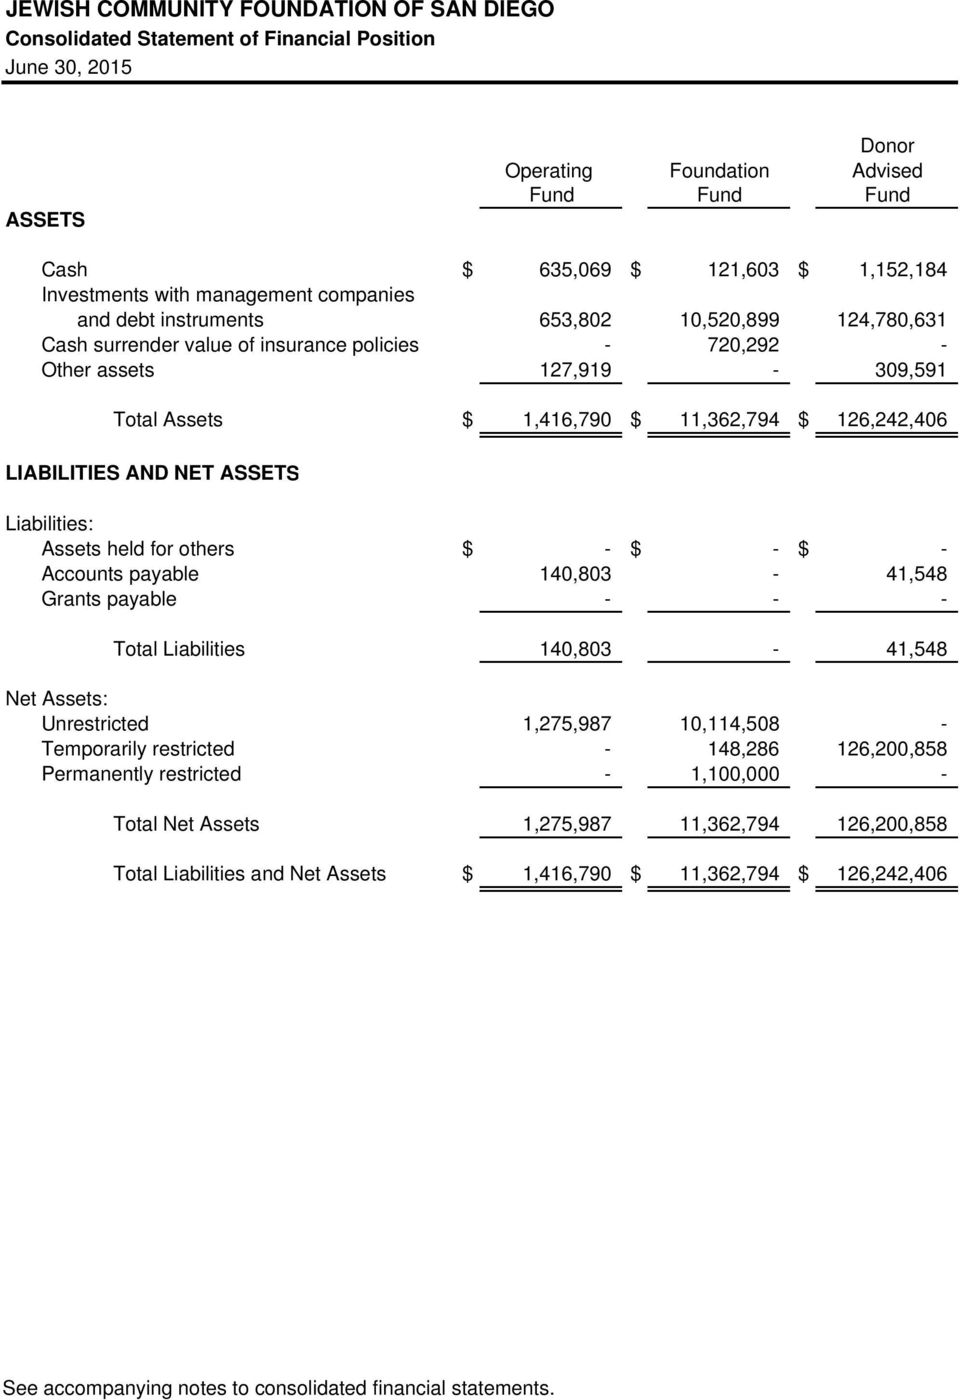 ASSETS Liabilities: Assets held for others $ - $ - $ - Accounts payable 140,803-41,548 Grants payable - - - Total Liabilities 140,803-41,548 Net Assets: Unrestricted 1,275,987 10,114,508 -